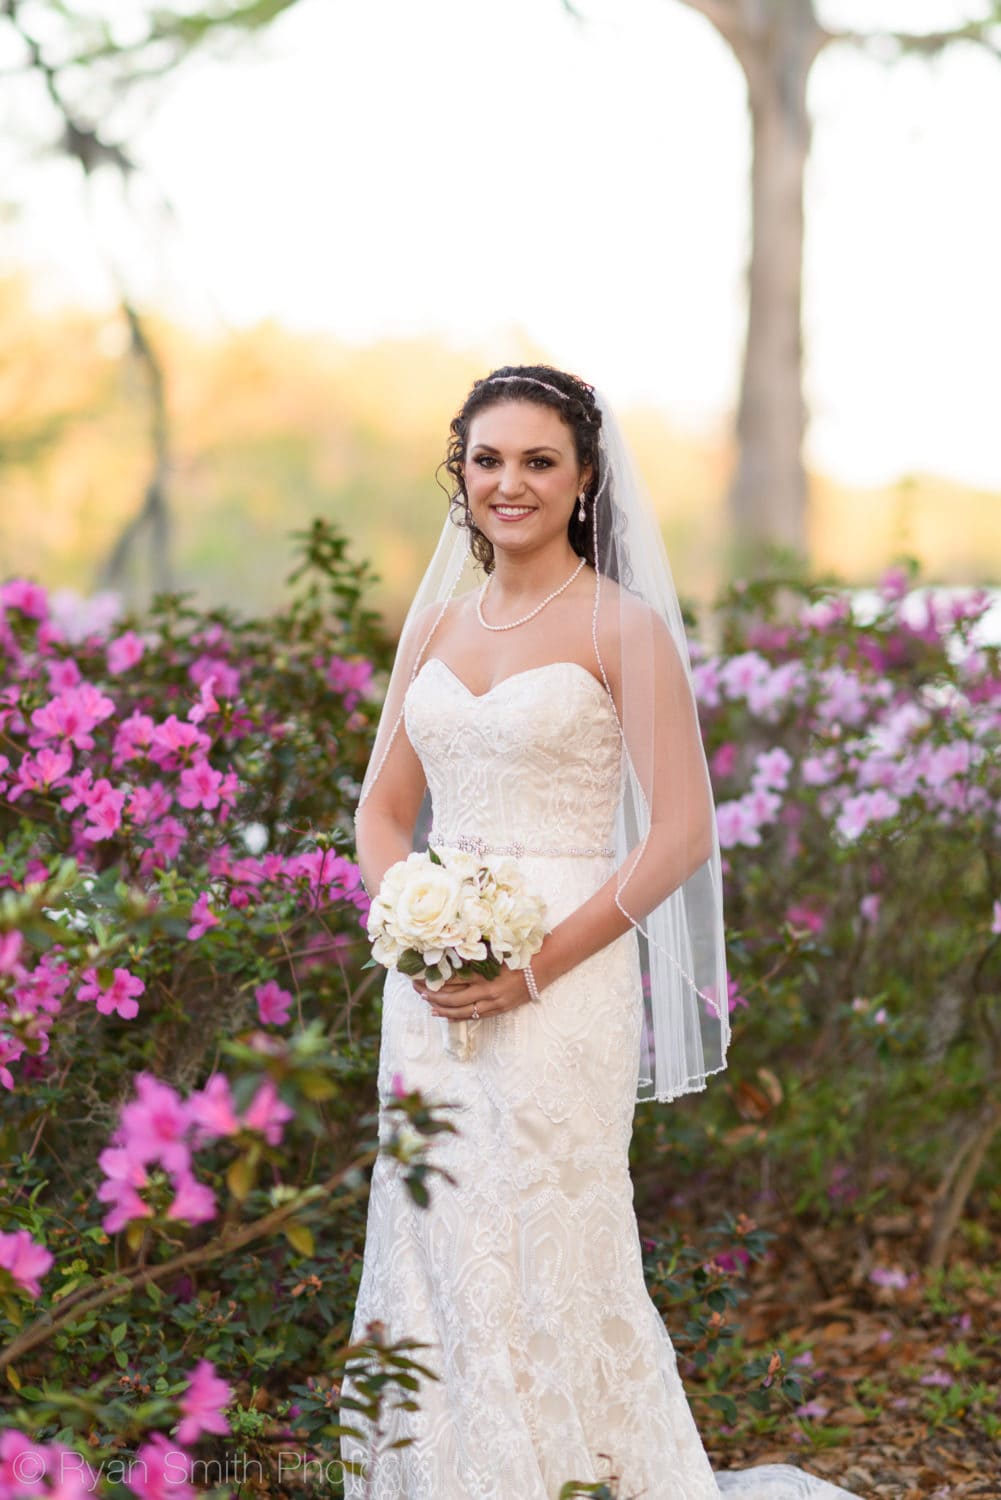 Bride surrounded by flowers - Upper Mill Plantation